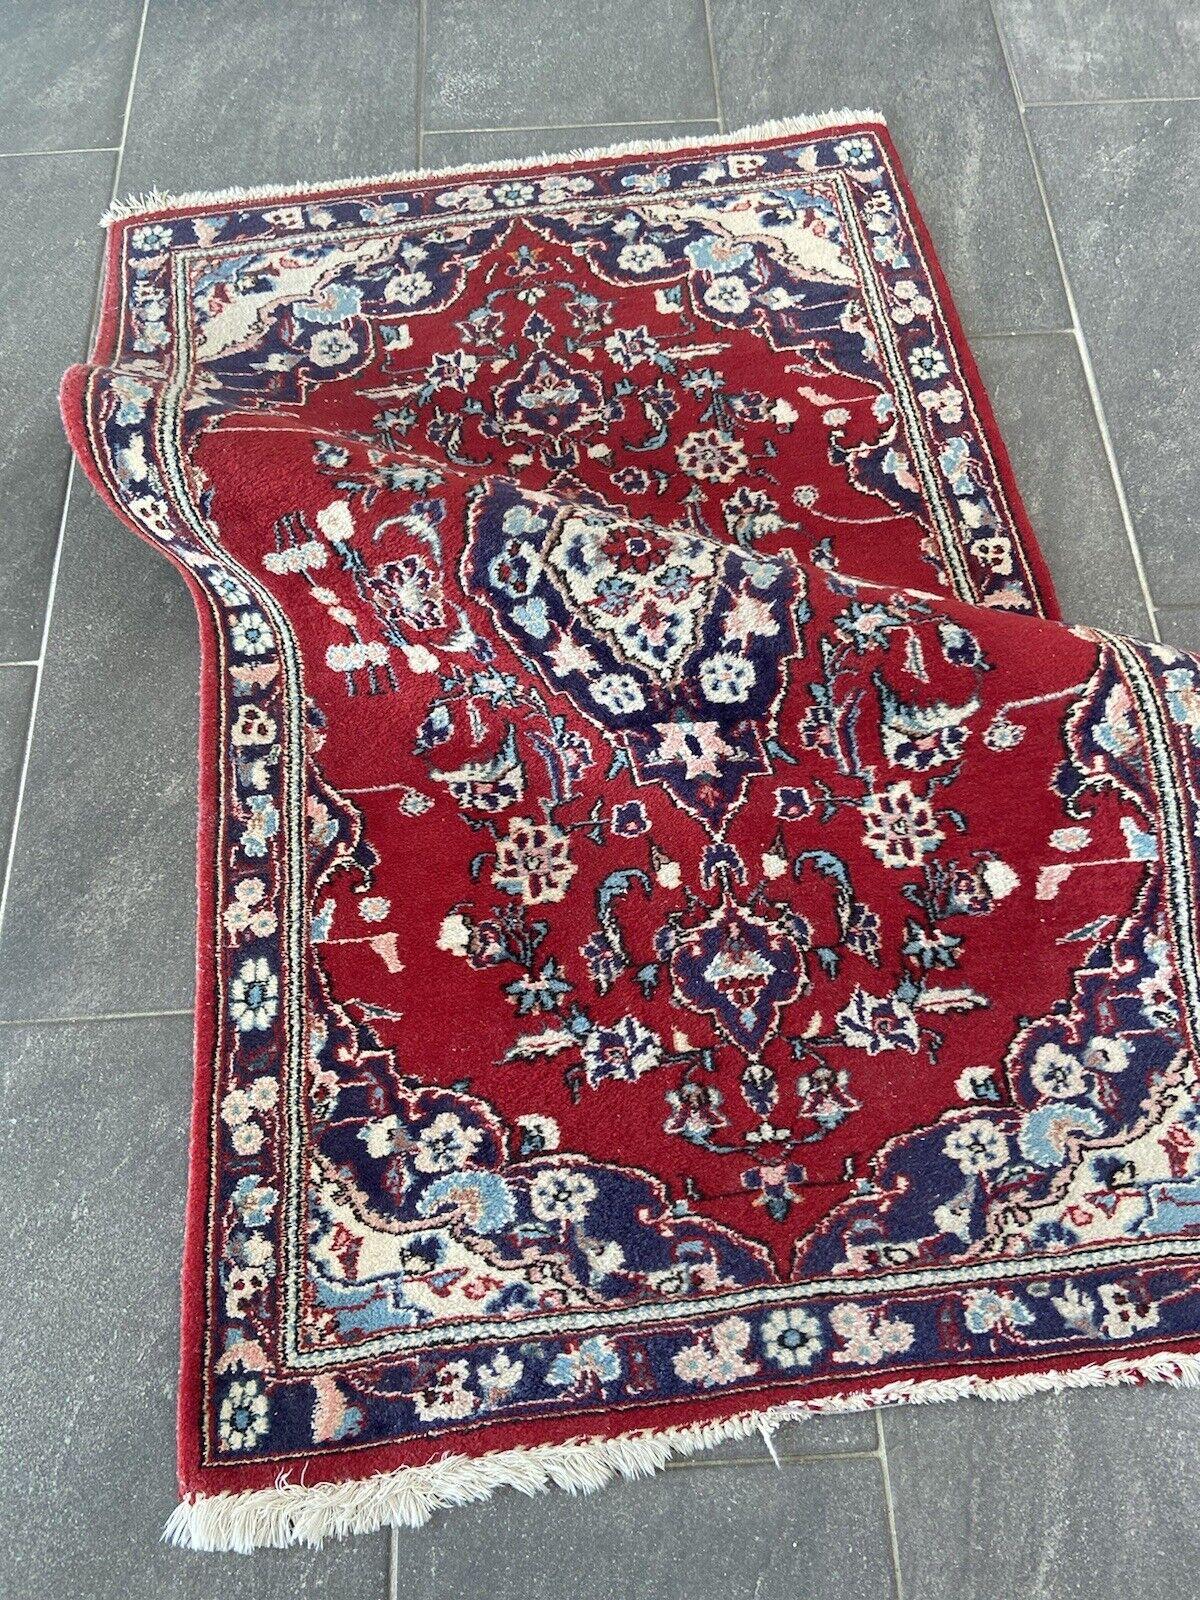 Handmade Vintage Persian Style Hamadan Rug 2.5' x 4.1', 1960s - 1S11 In Good Condition For Sale In Bordeaux, FR